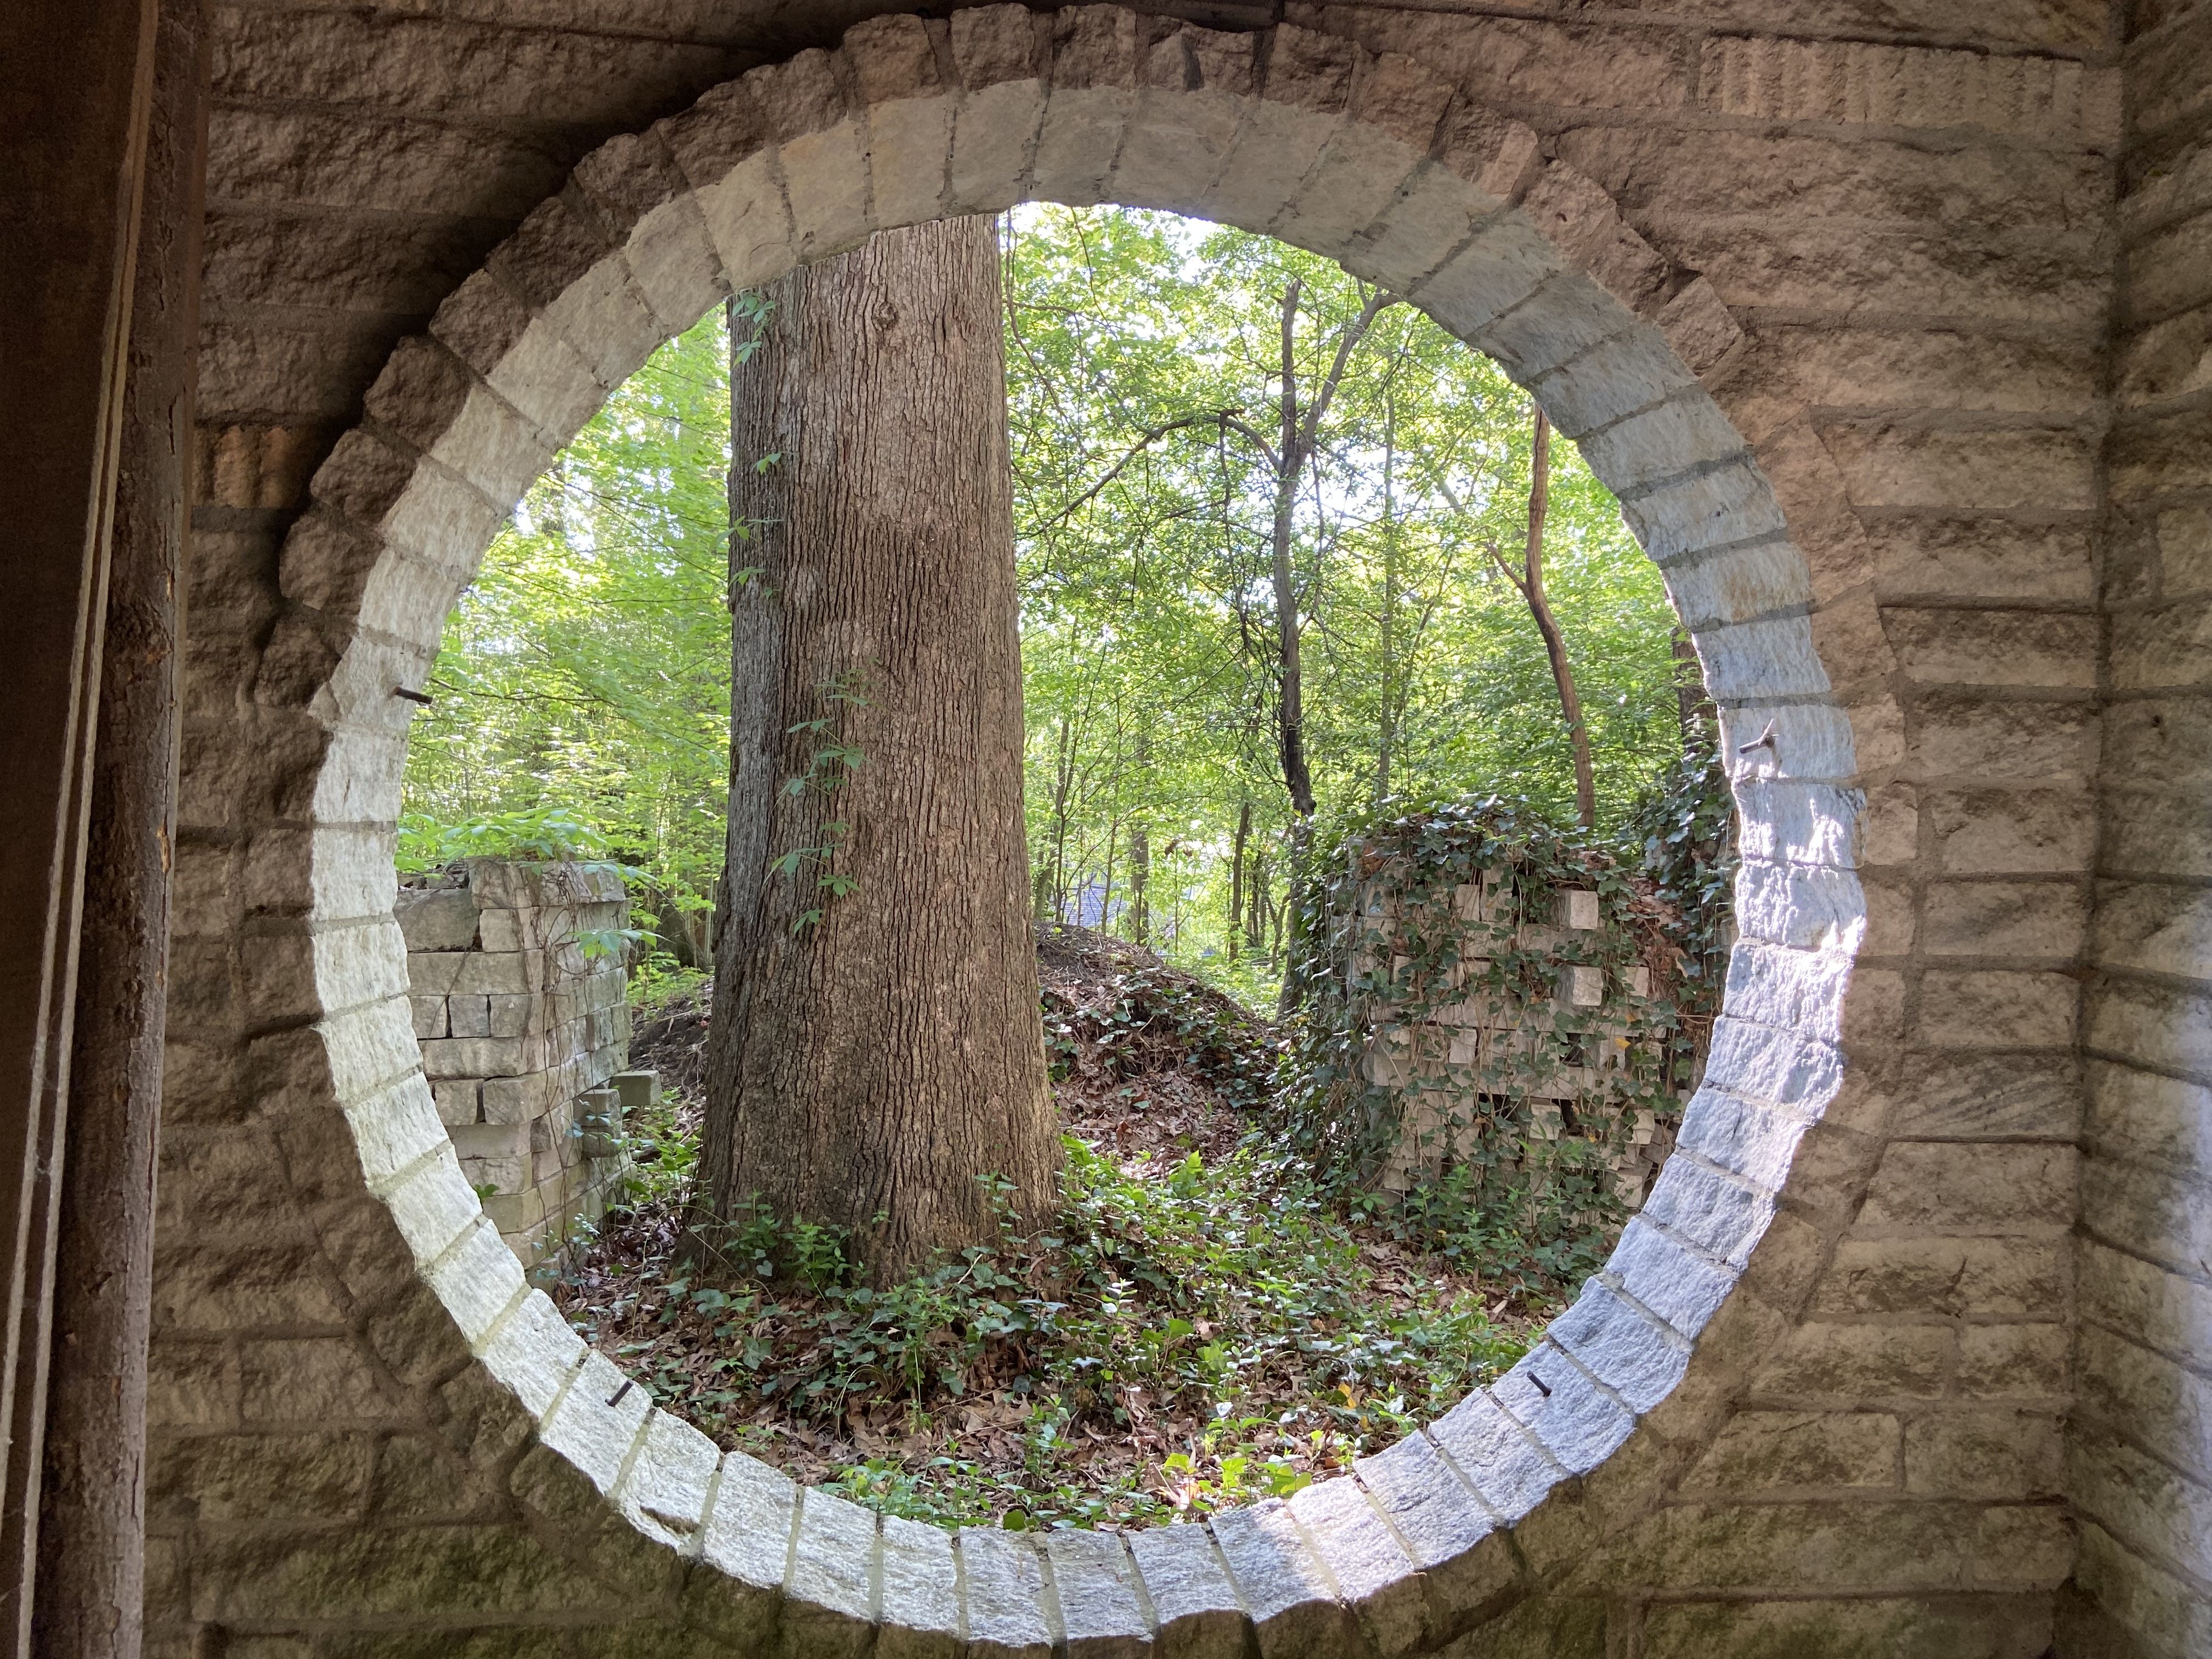 A view through a circular porch opening into a green and wooded front yard